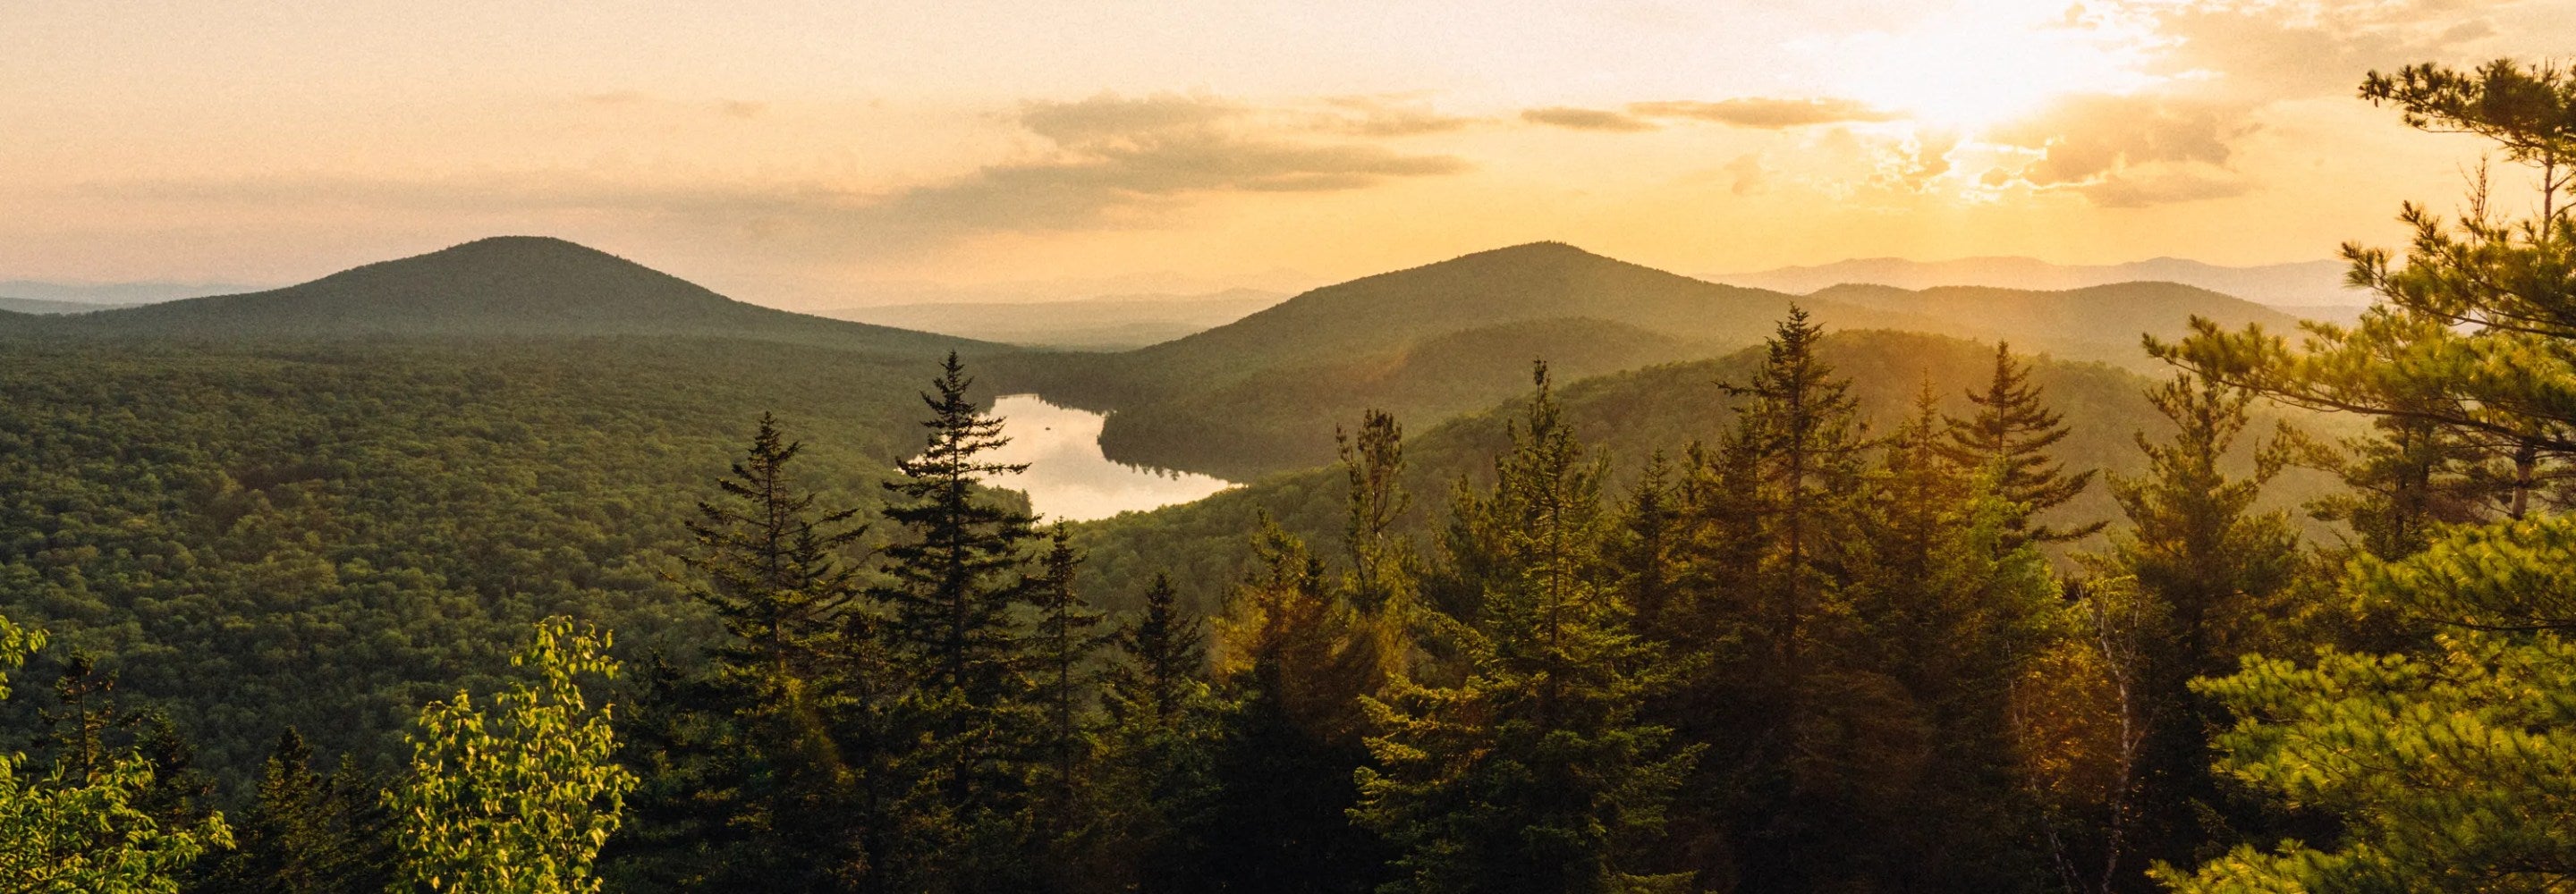 Mountain vista at sunset, showing the beauty of Vermont